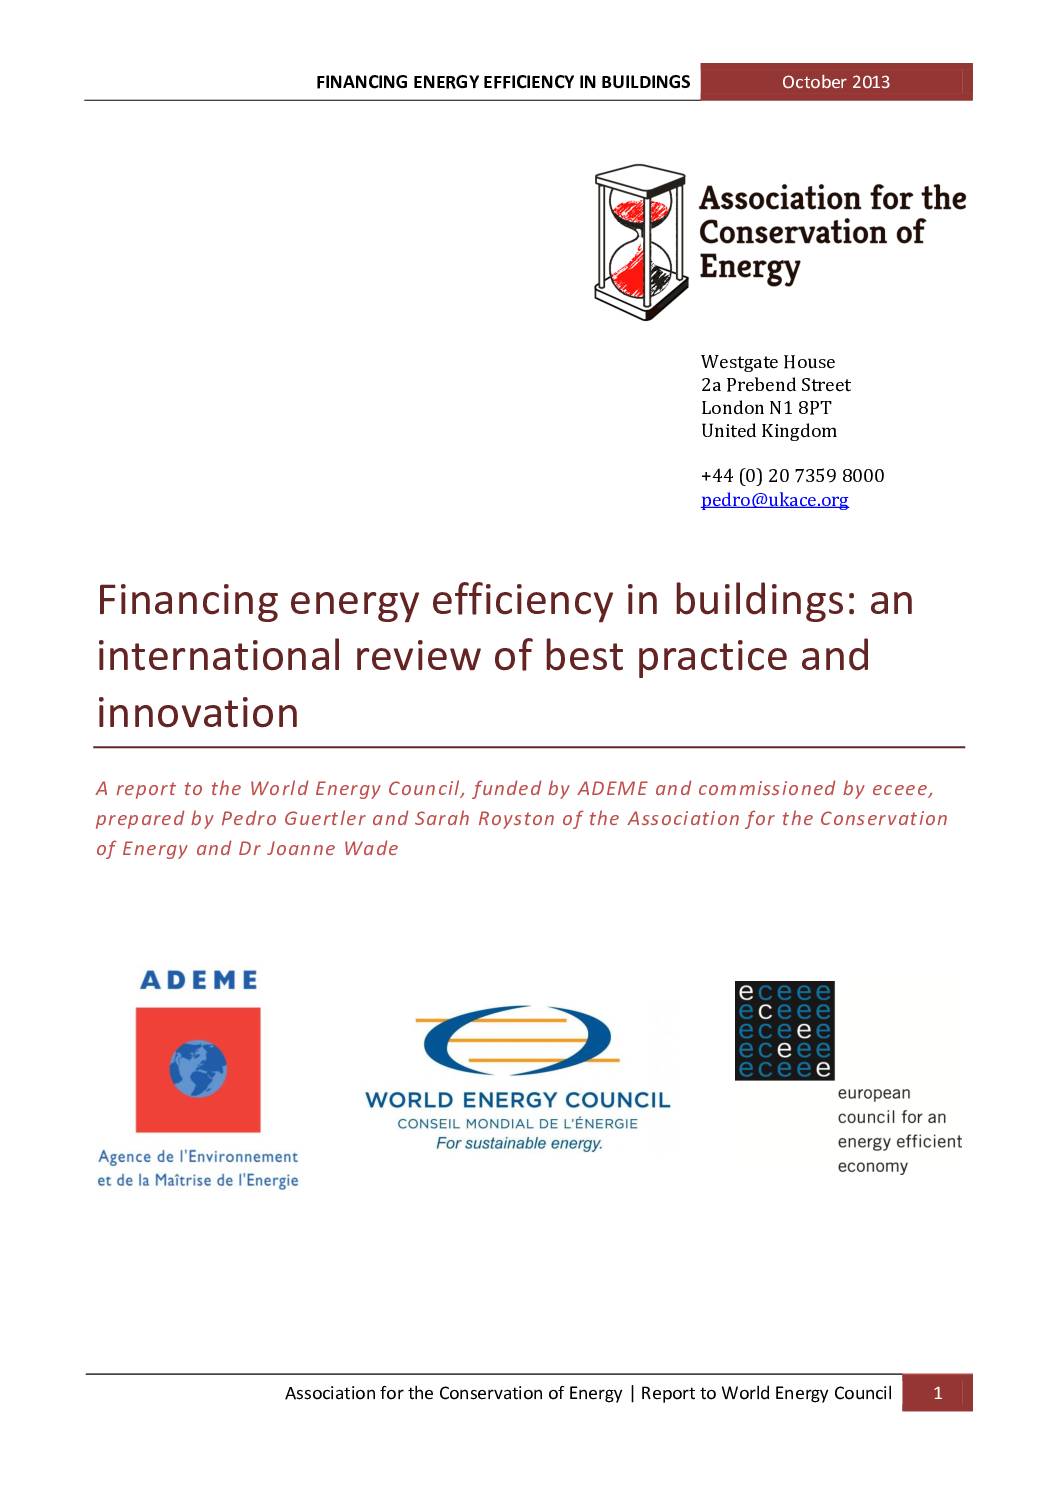 Financing energy efficiency in buildings: an international review of best practice and innovation